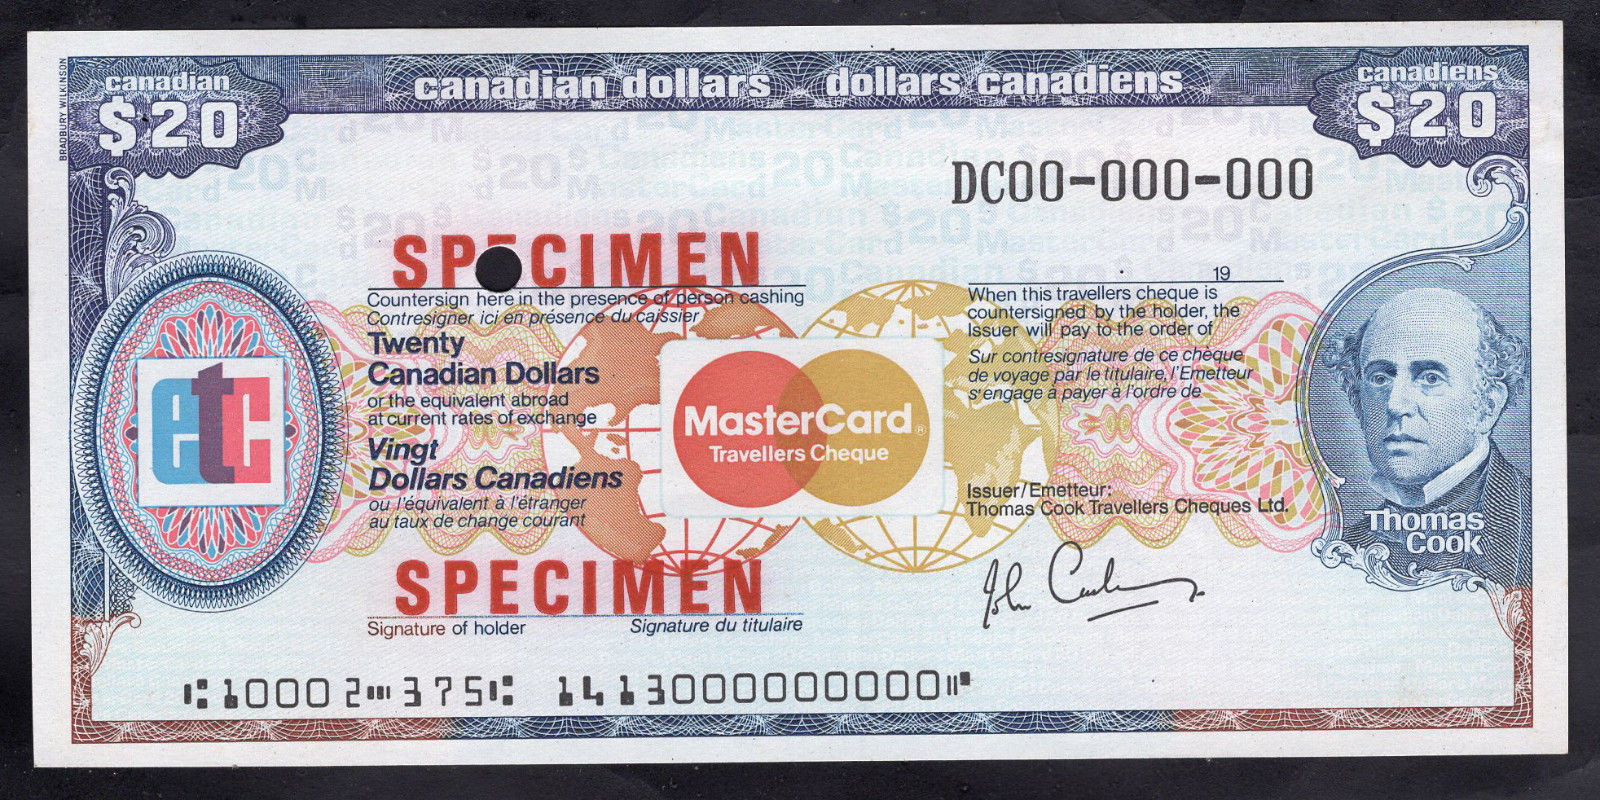 travellers cheques in canada